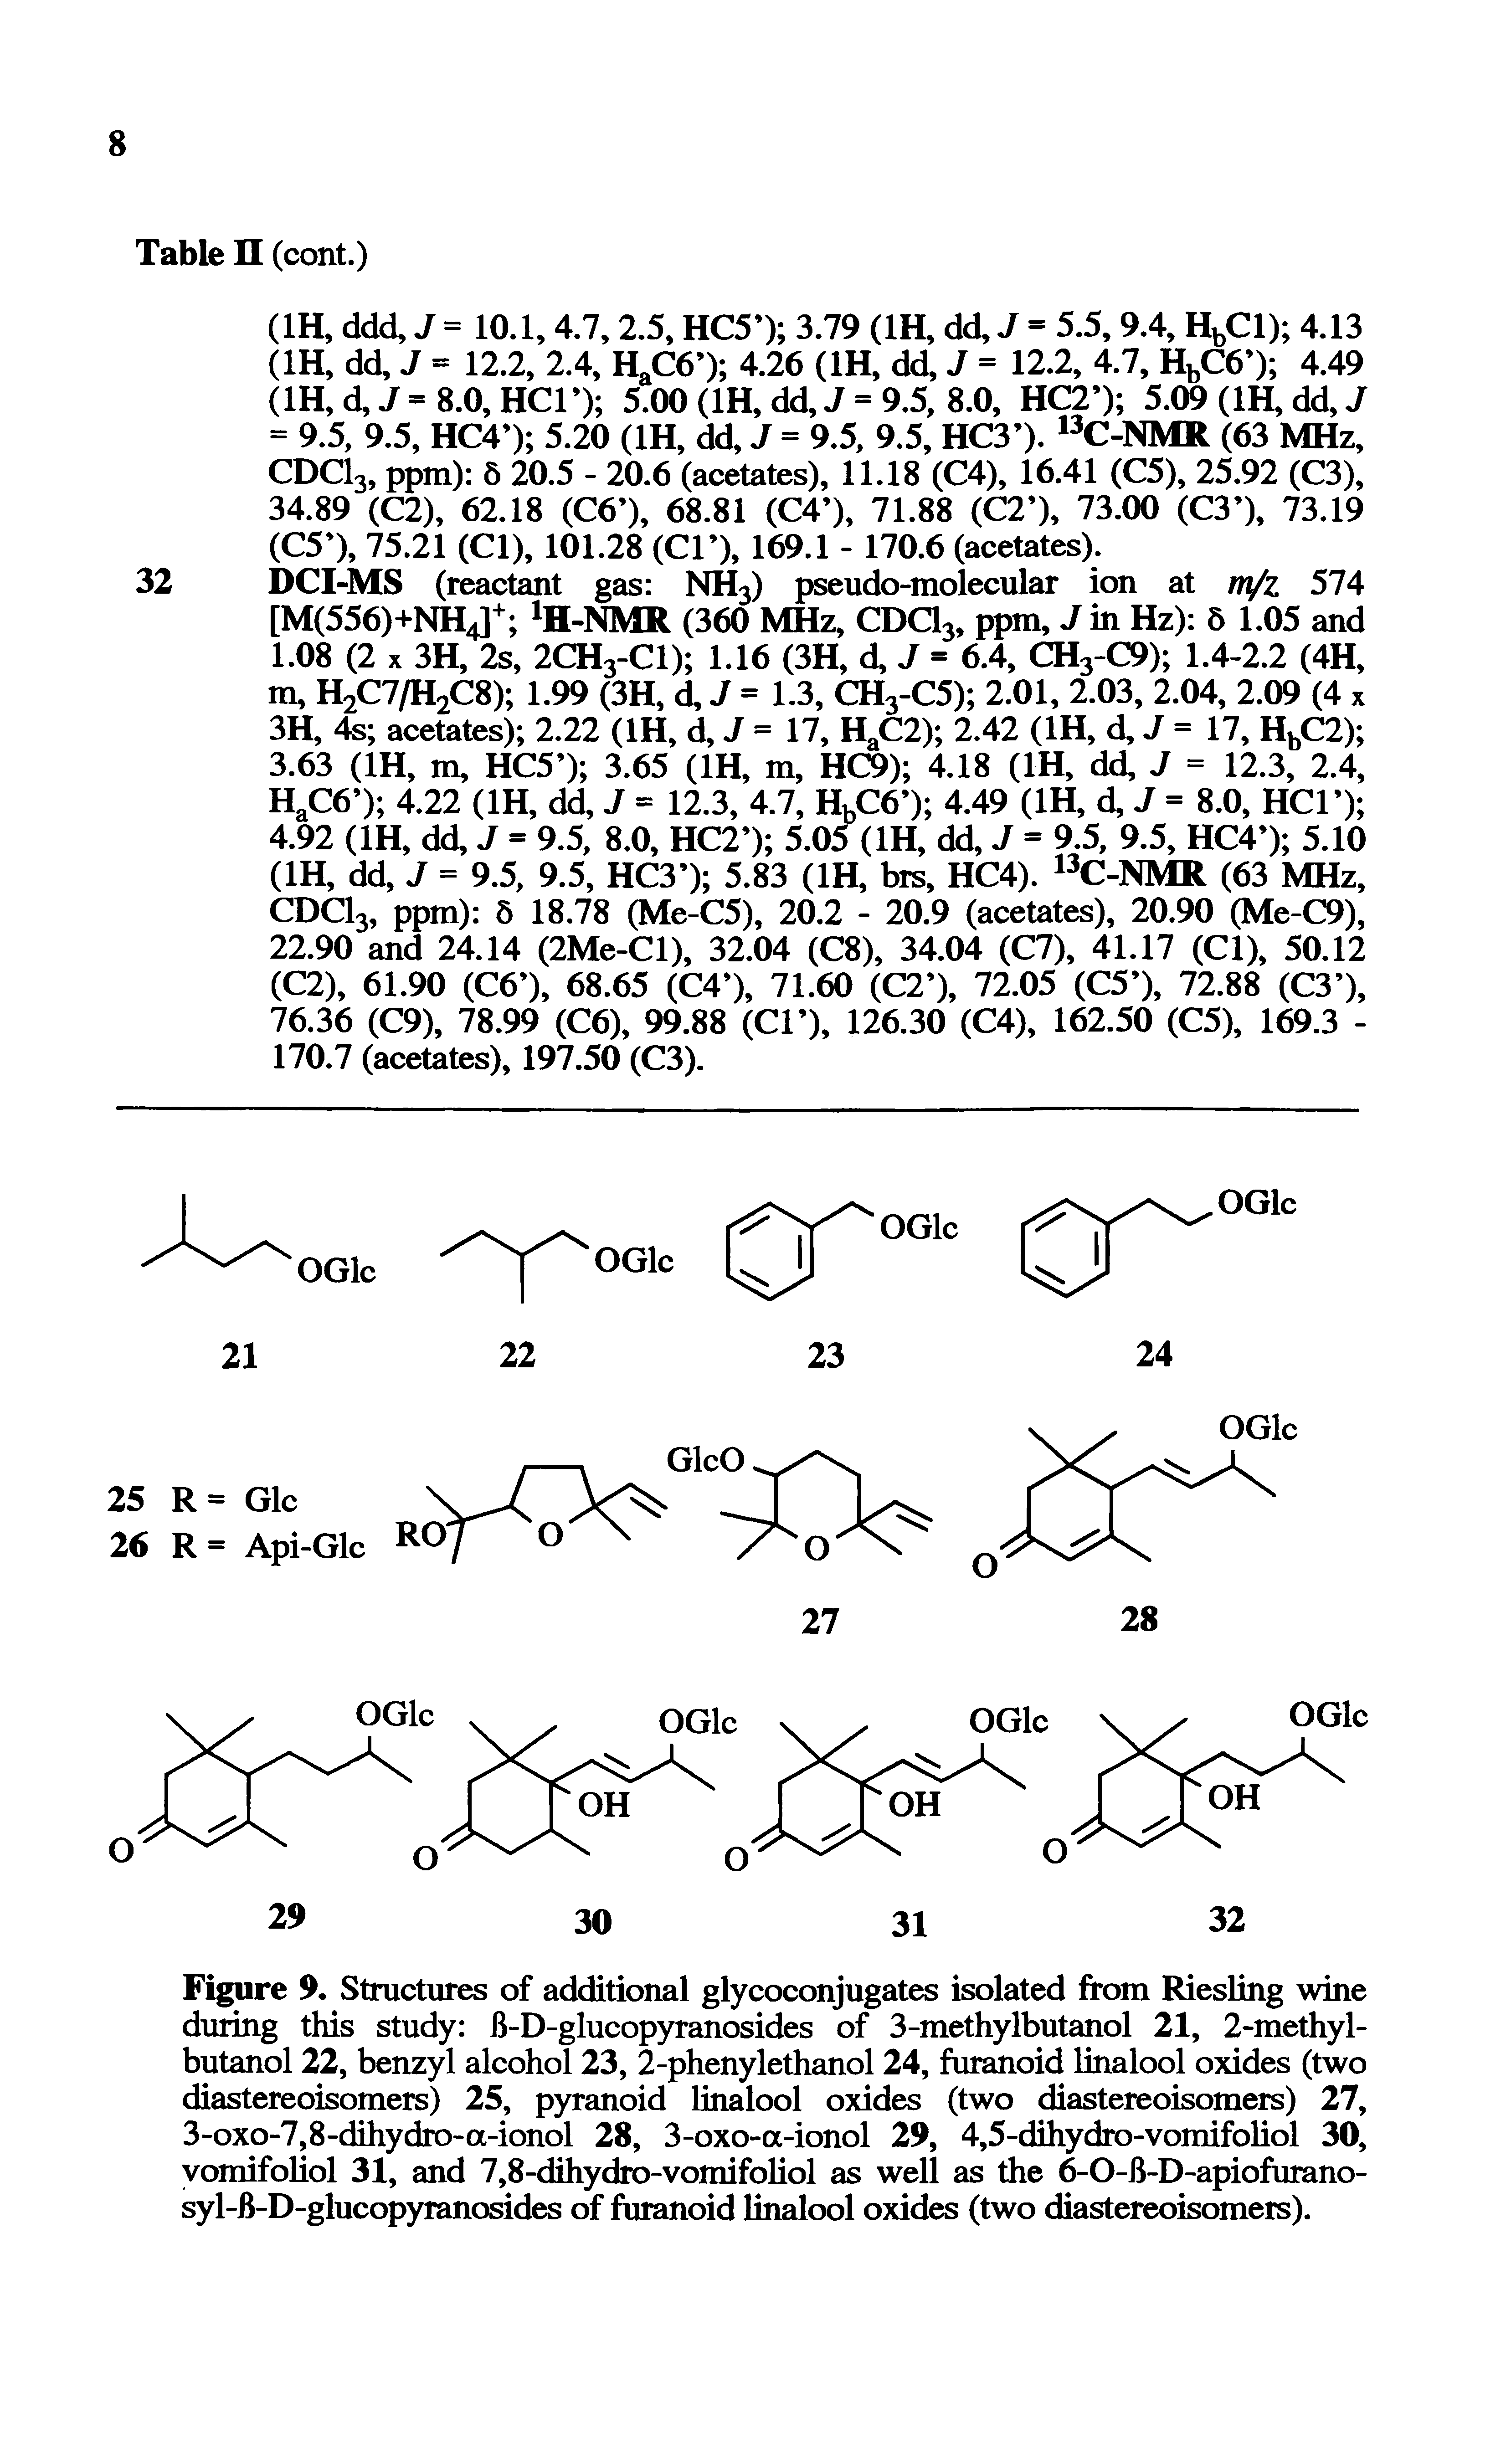 Figure 9. Structures of additional glycoconjugates isolated from Riesling wine during this study B-D-glucopyranosides of 3-methylbutanol 21, 2-methyl-butanol 22, benzyl alcohol 23, 2-phenylethanol 24, furanoid linalool oxides (two diastereoisomers) 25, pyranoid linalool oxides (two diastereoisomers) 27, 3-oxo-7,8-dihydrc>-a-ionol 28, 3-oxo-a-ionol 29, 4,5-dihydro-vomifoliol 30, vomifoliol 31, and 7,8-dihydro-vomifoliol as well as the 6-O-B-D-apiofurano-syl-fi-D-glucopyranosides of furanoid linalool oxides (two diastereoisomers).